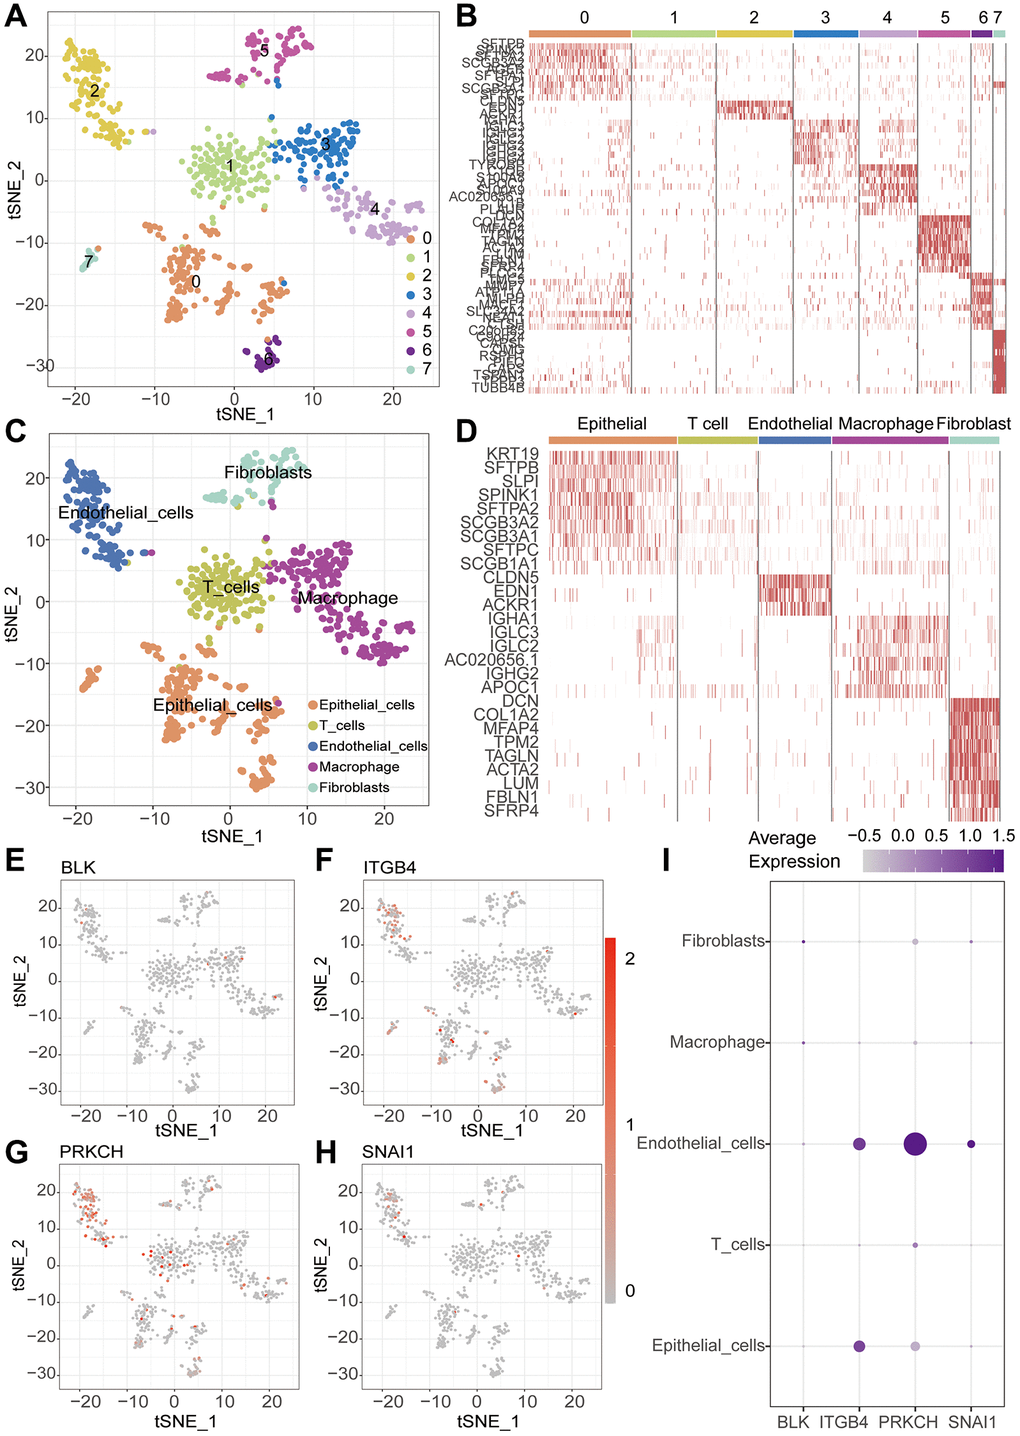 Single-cell sequencing analysis. (A) t-SNE clustering algorithm is used to classify cells into 8 clusters. (B) Heatmap visualizes the differentially expressed genes among the identified clusters. (C) “SingleR” package is employed to annotate different cell types, including T cells, Macrophage, Epithelial cells, Endothelial cells and Fibroblasts. (D) Heatmap visualizes the differentially expressed genes among the identified cells. (E–I) ScRNA-seq analysis reveals the expression patterns of key genes across different cell types.